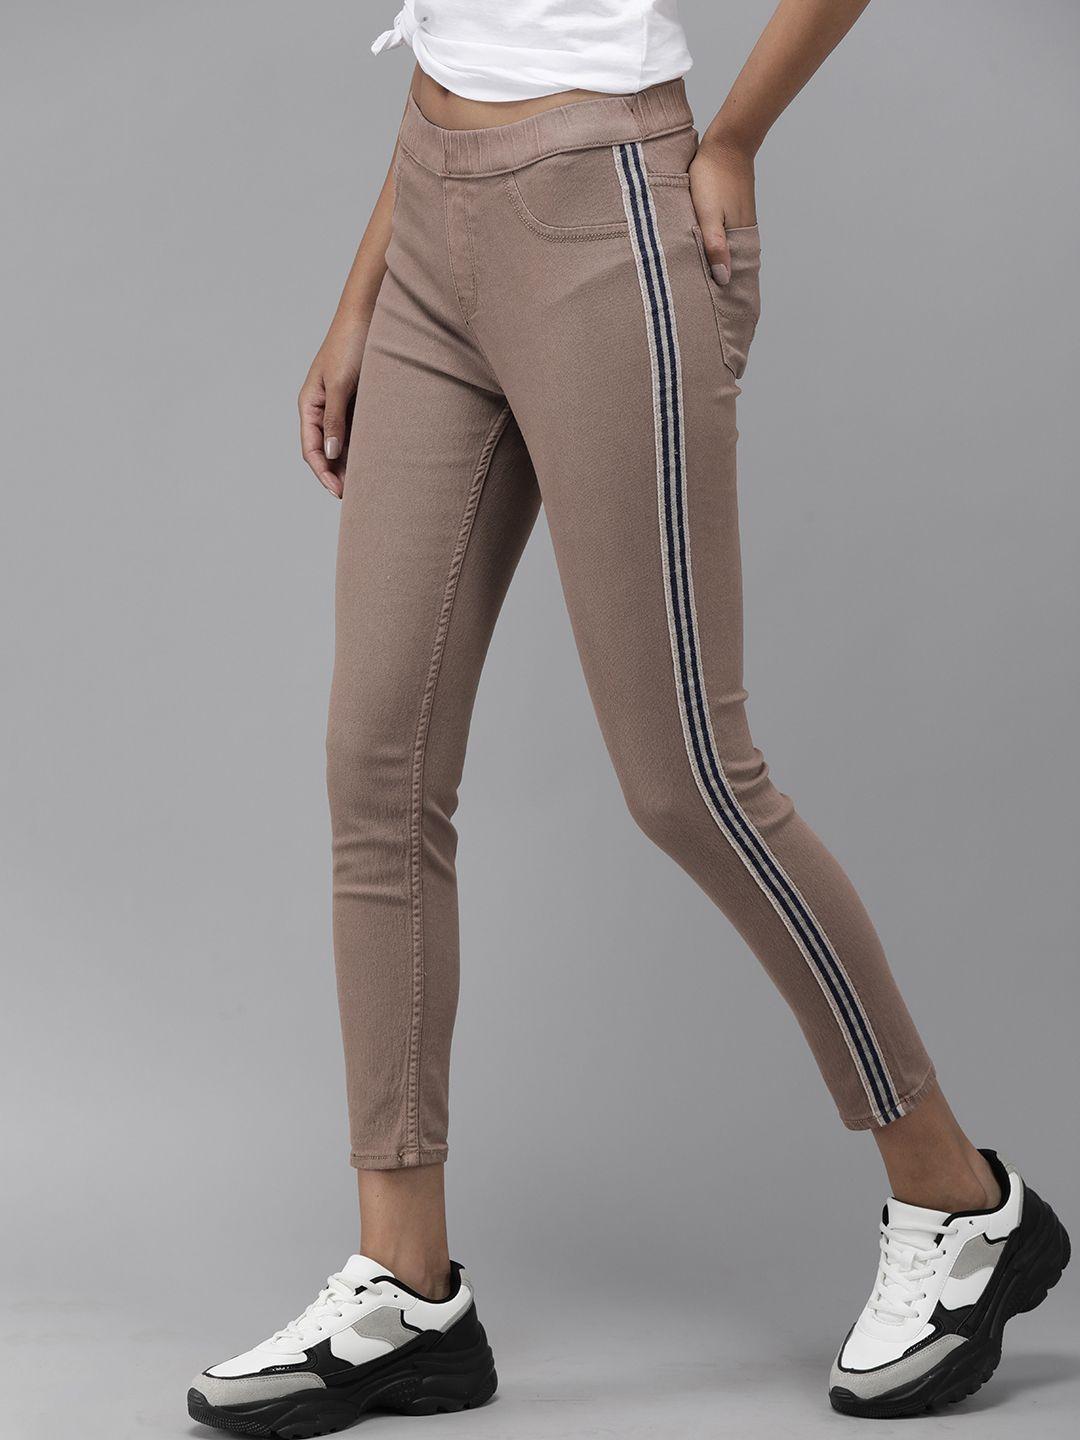 the-roadster-lifestyle-co-women-mauve-solid-cropped-jeggings-with-side-stripes